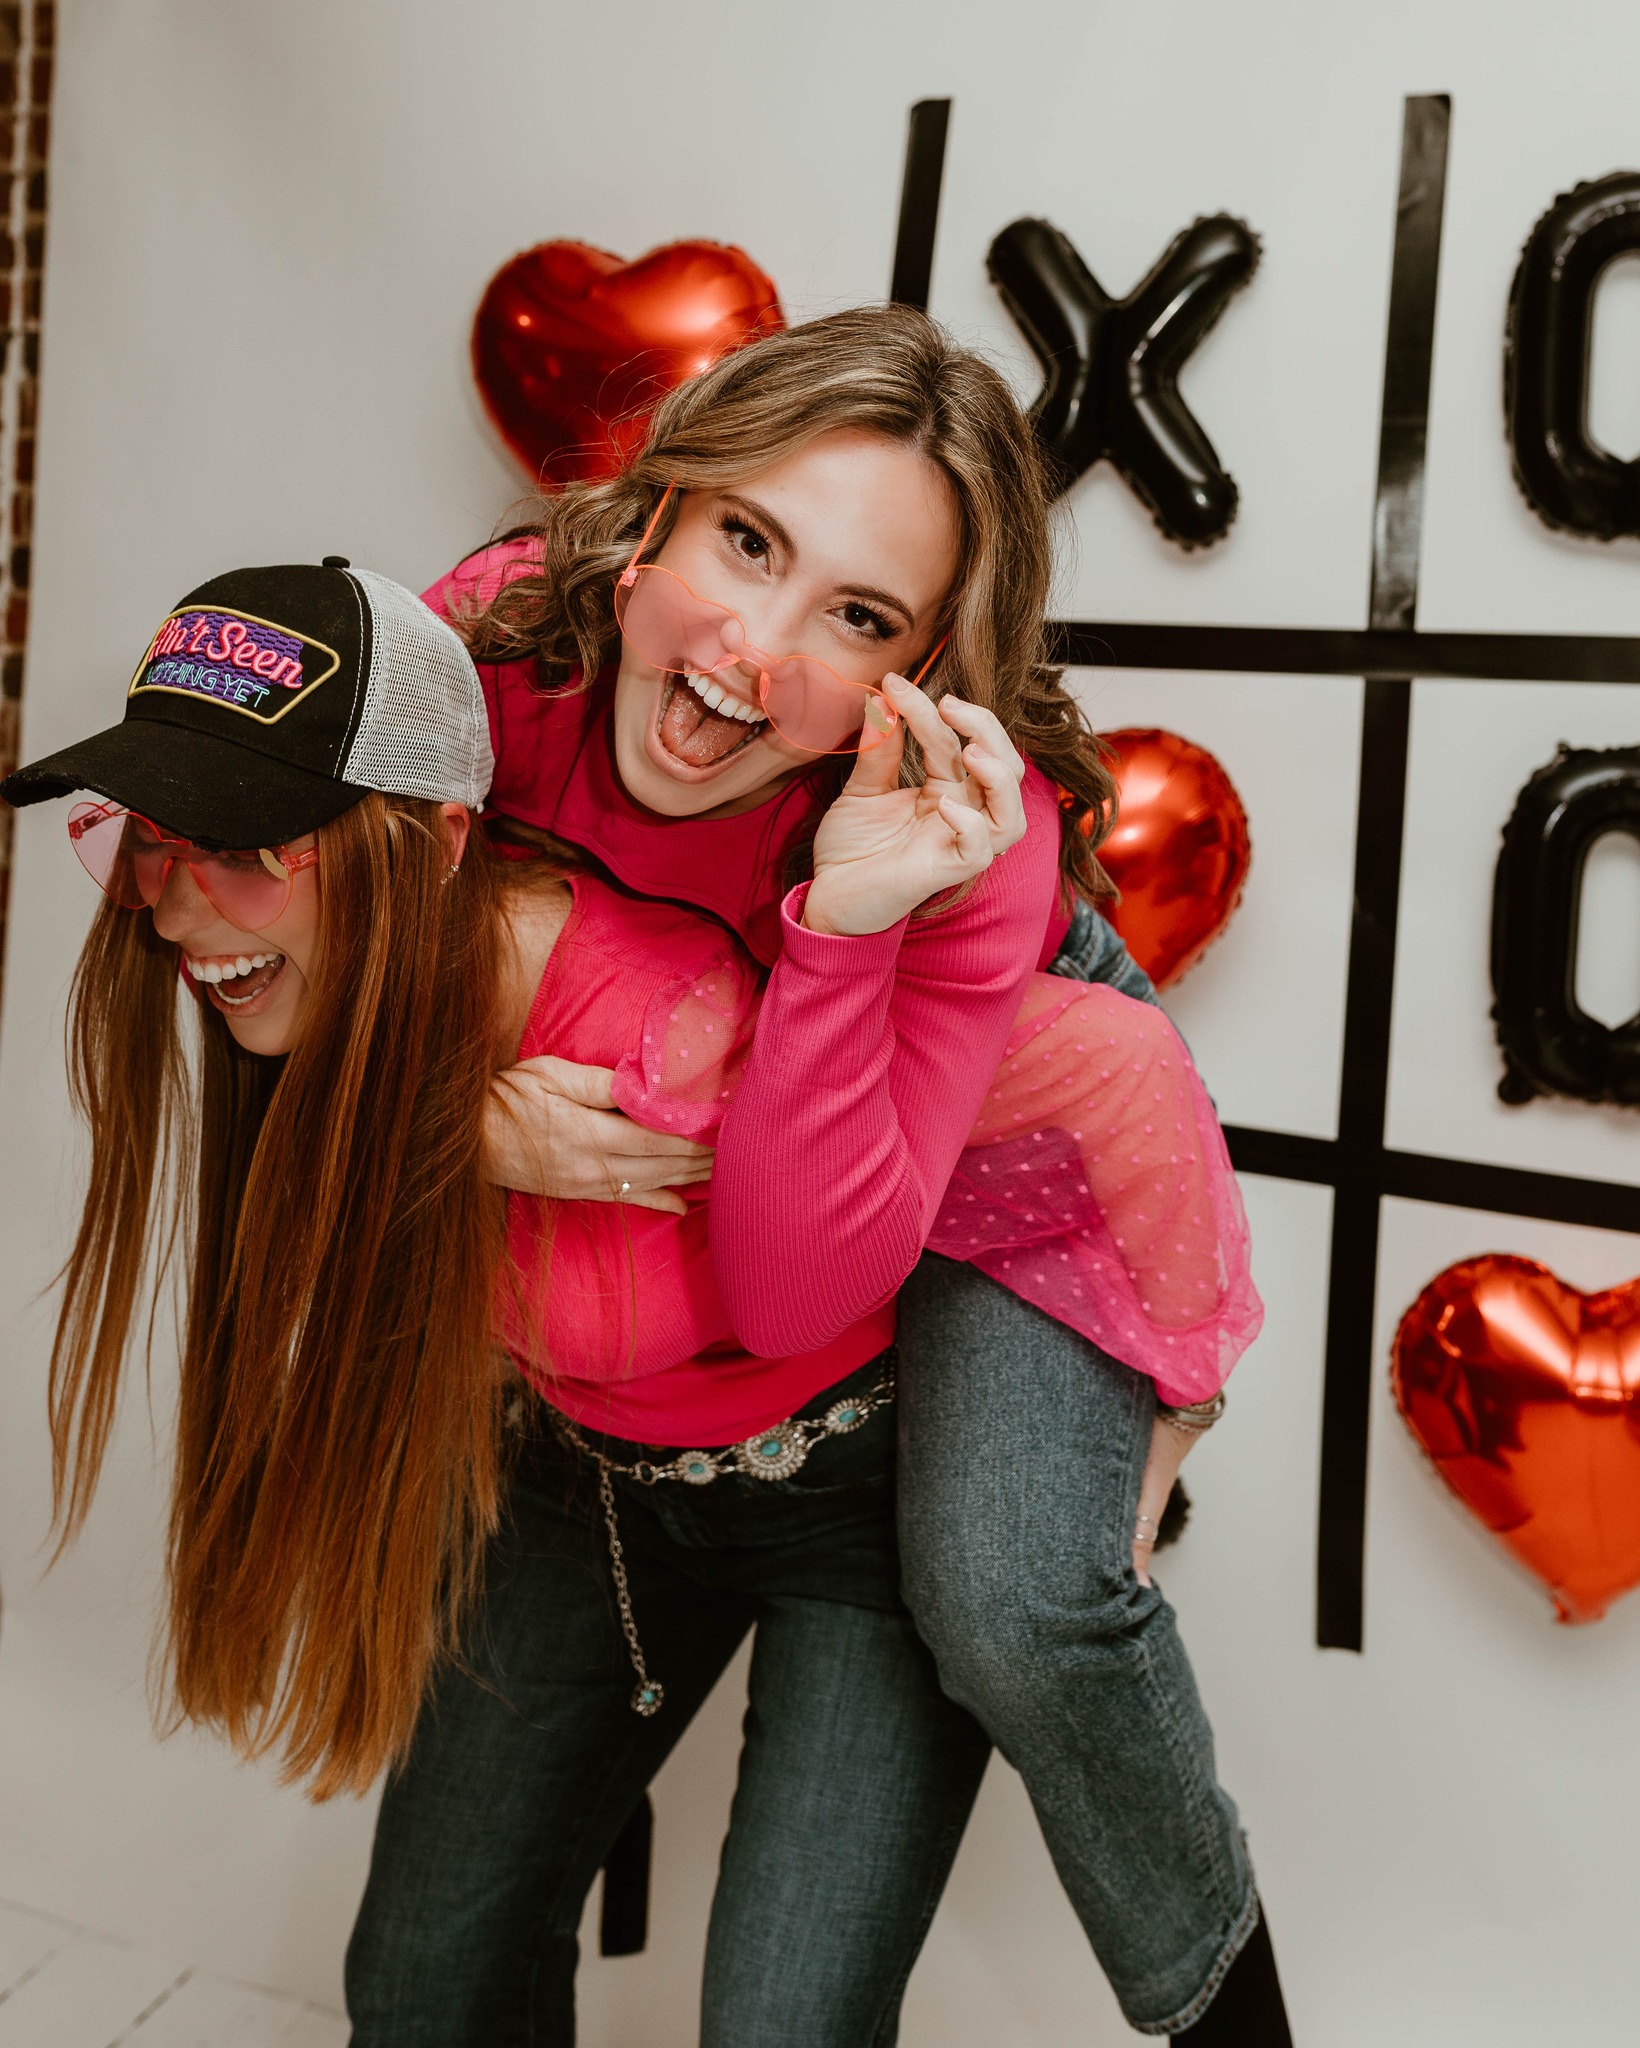 two female friends in front of tic tac toe backdrop. One friend is giving the other a piggy back ride. They are smiling. and wearing heart shaped glasss